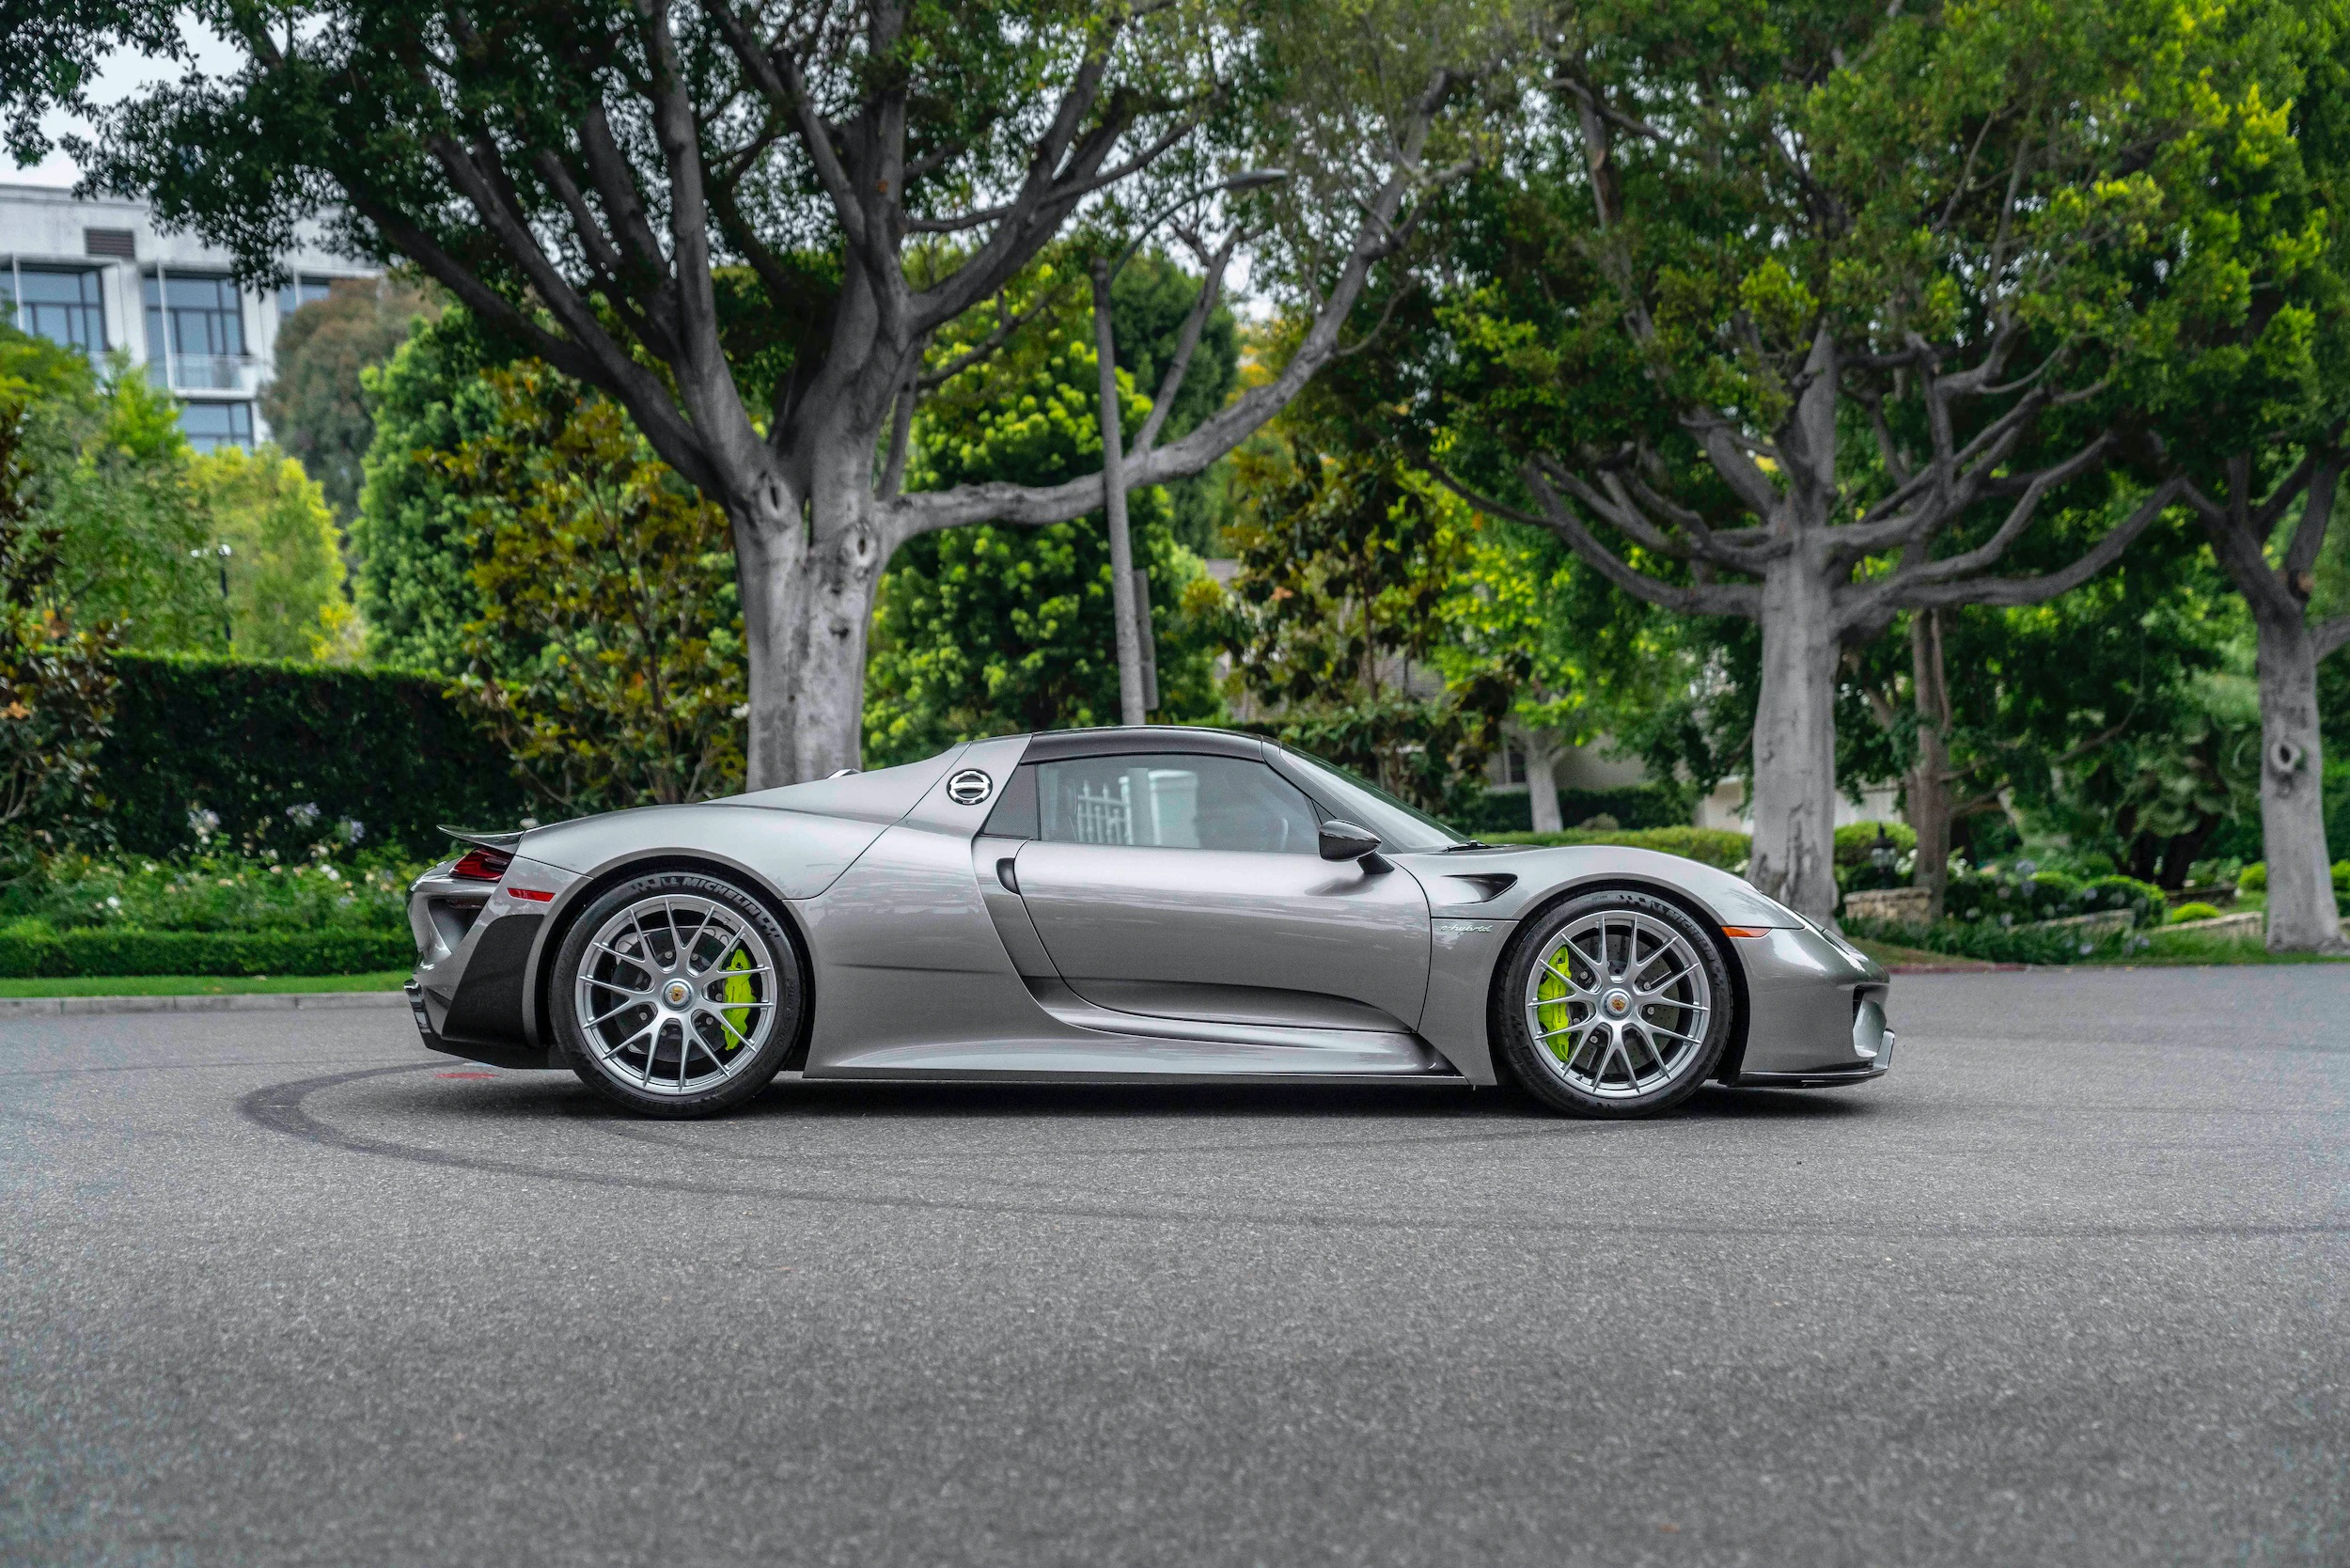 Silver 2015 Porsche 918 Spyder Weissach Edition on road with trees in background